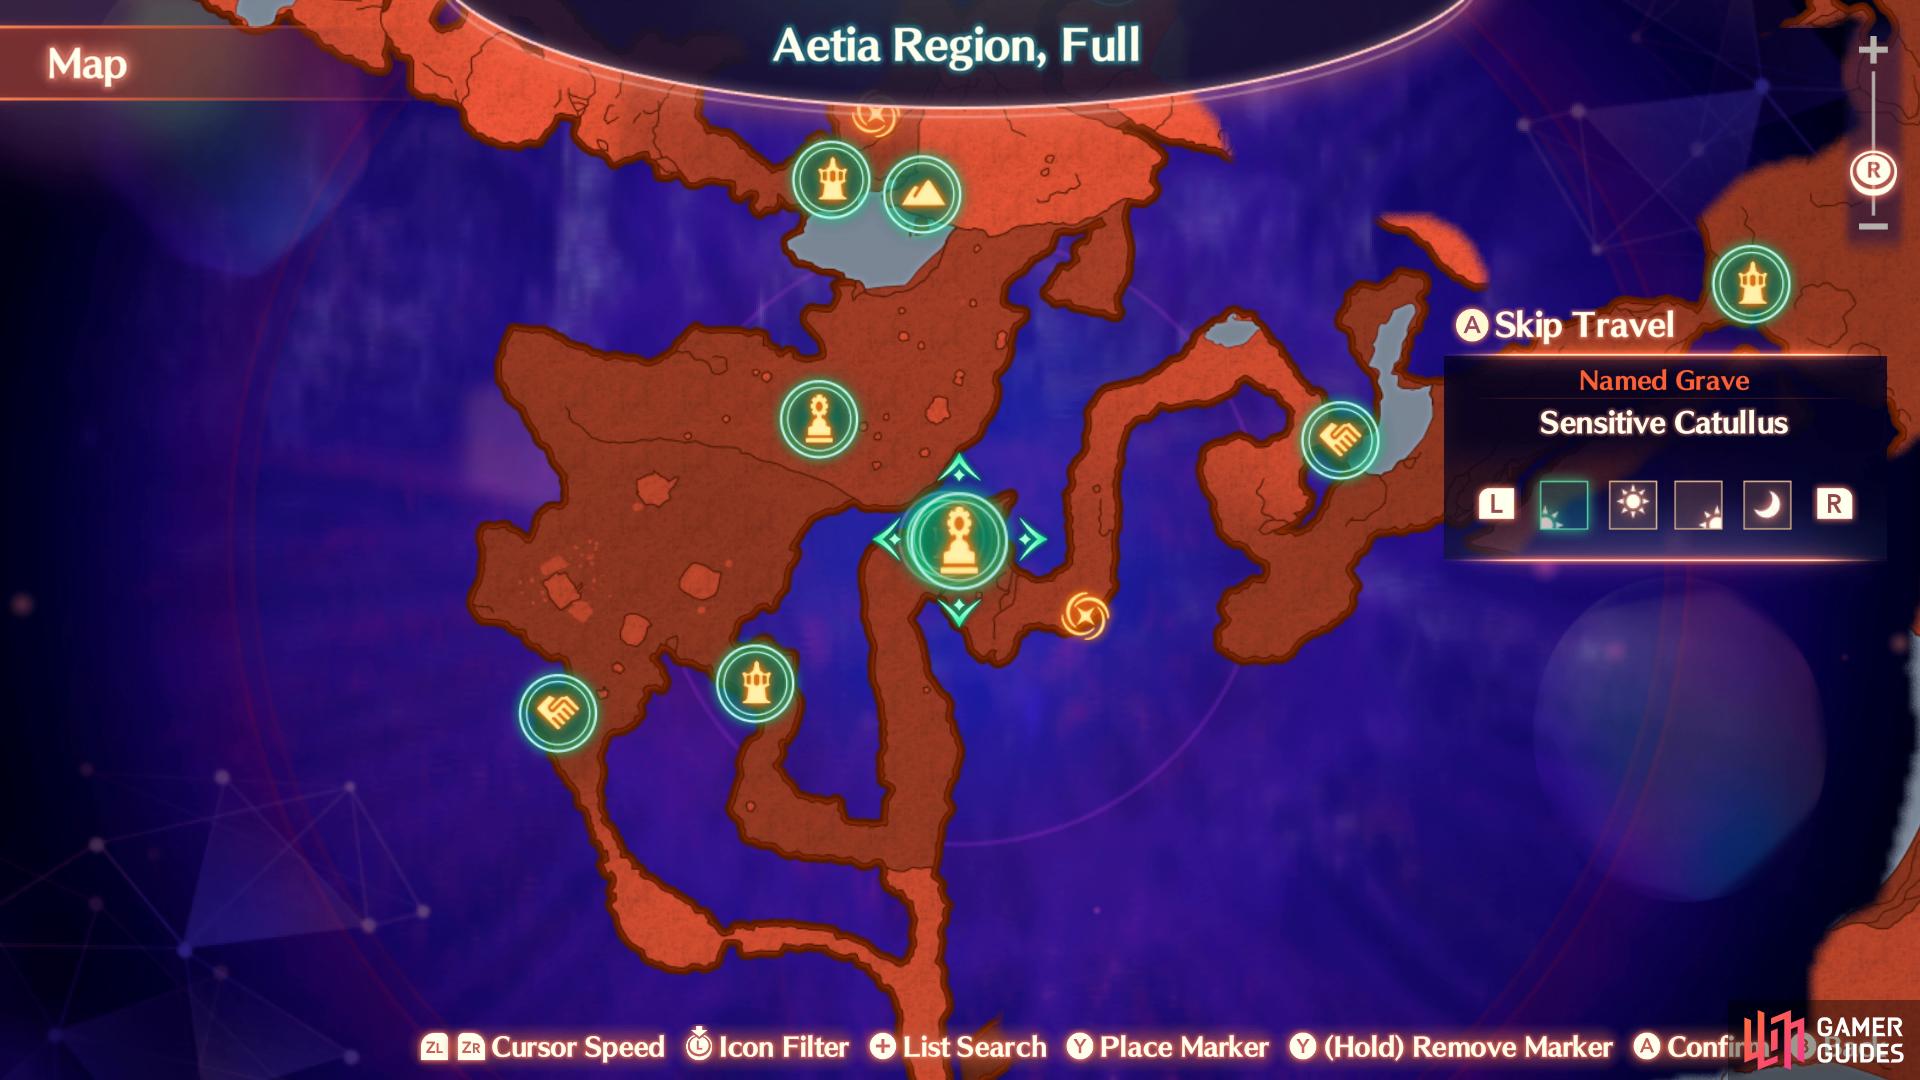 Head to this location in the Aetia Region